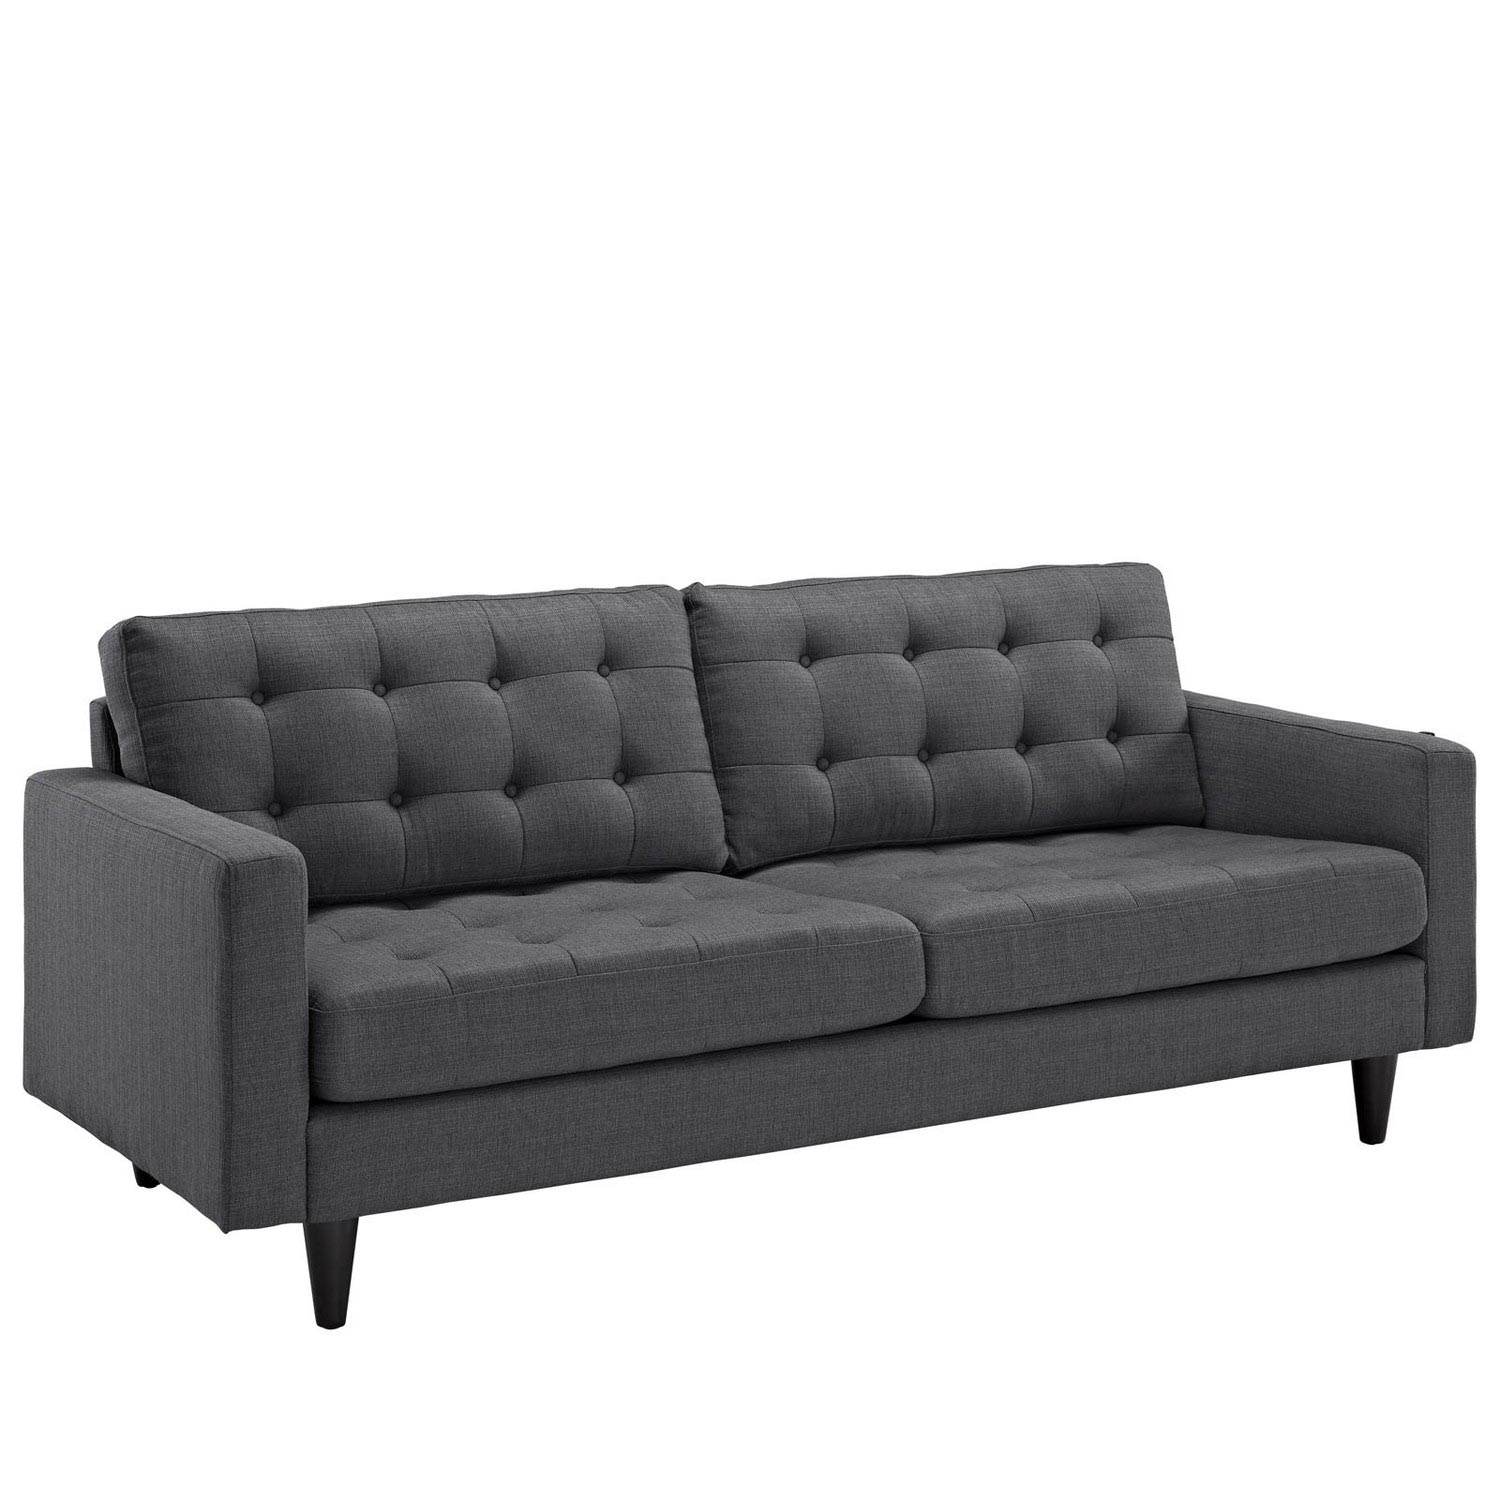 Modway Empress 3PC Sofa and Armchairs Set - Gray